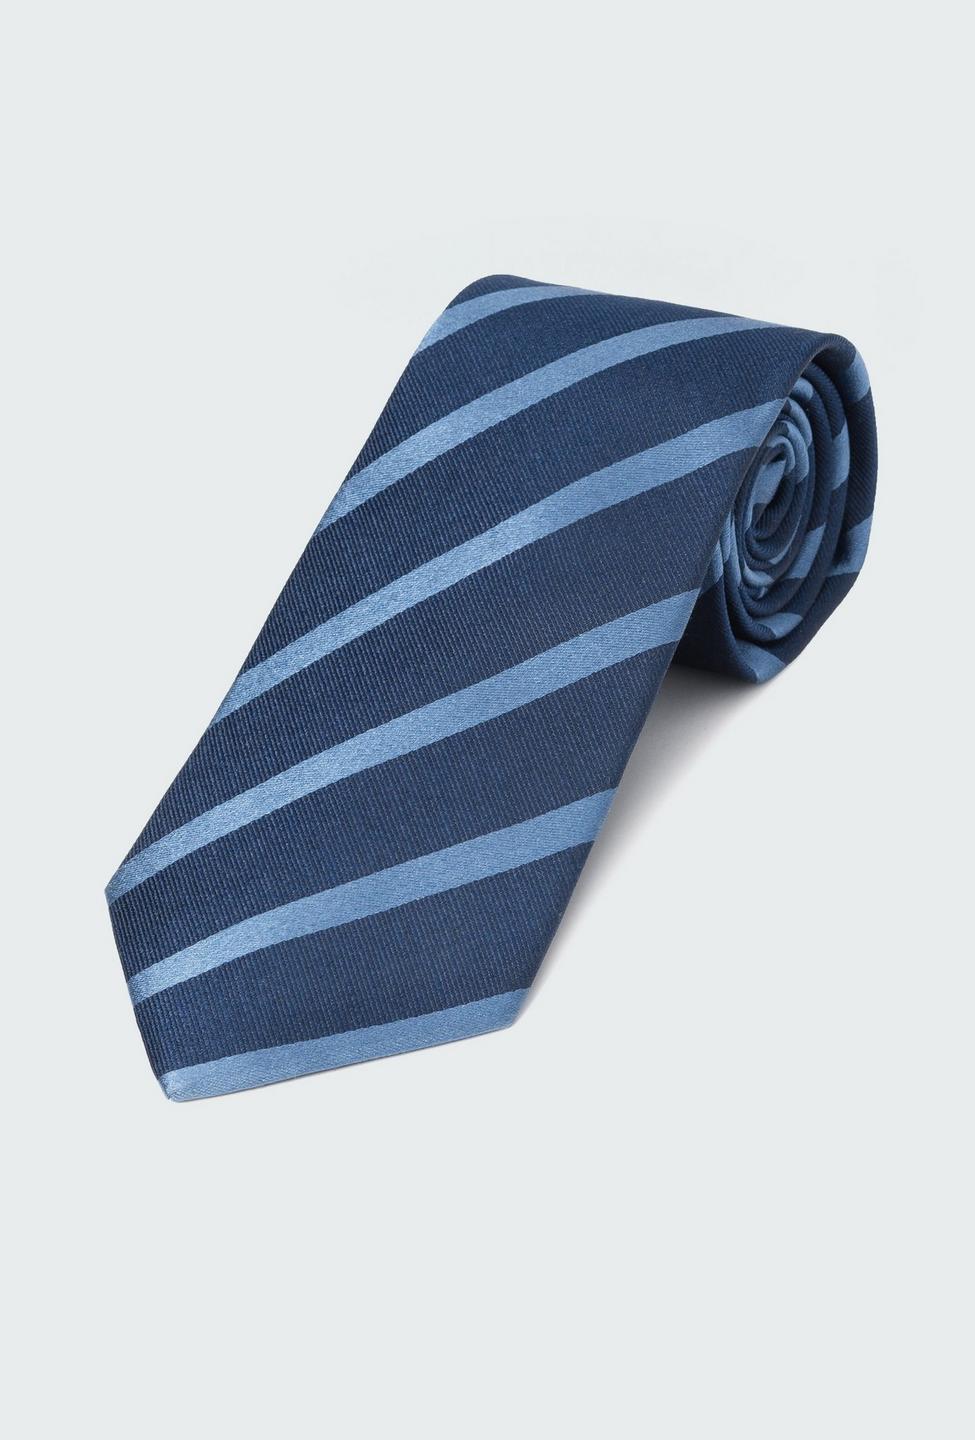 Navy tie - Striped Design from Indochino Collection